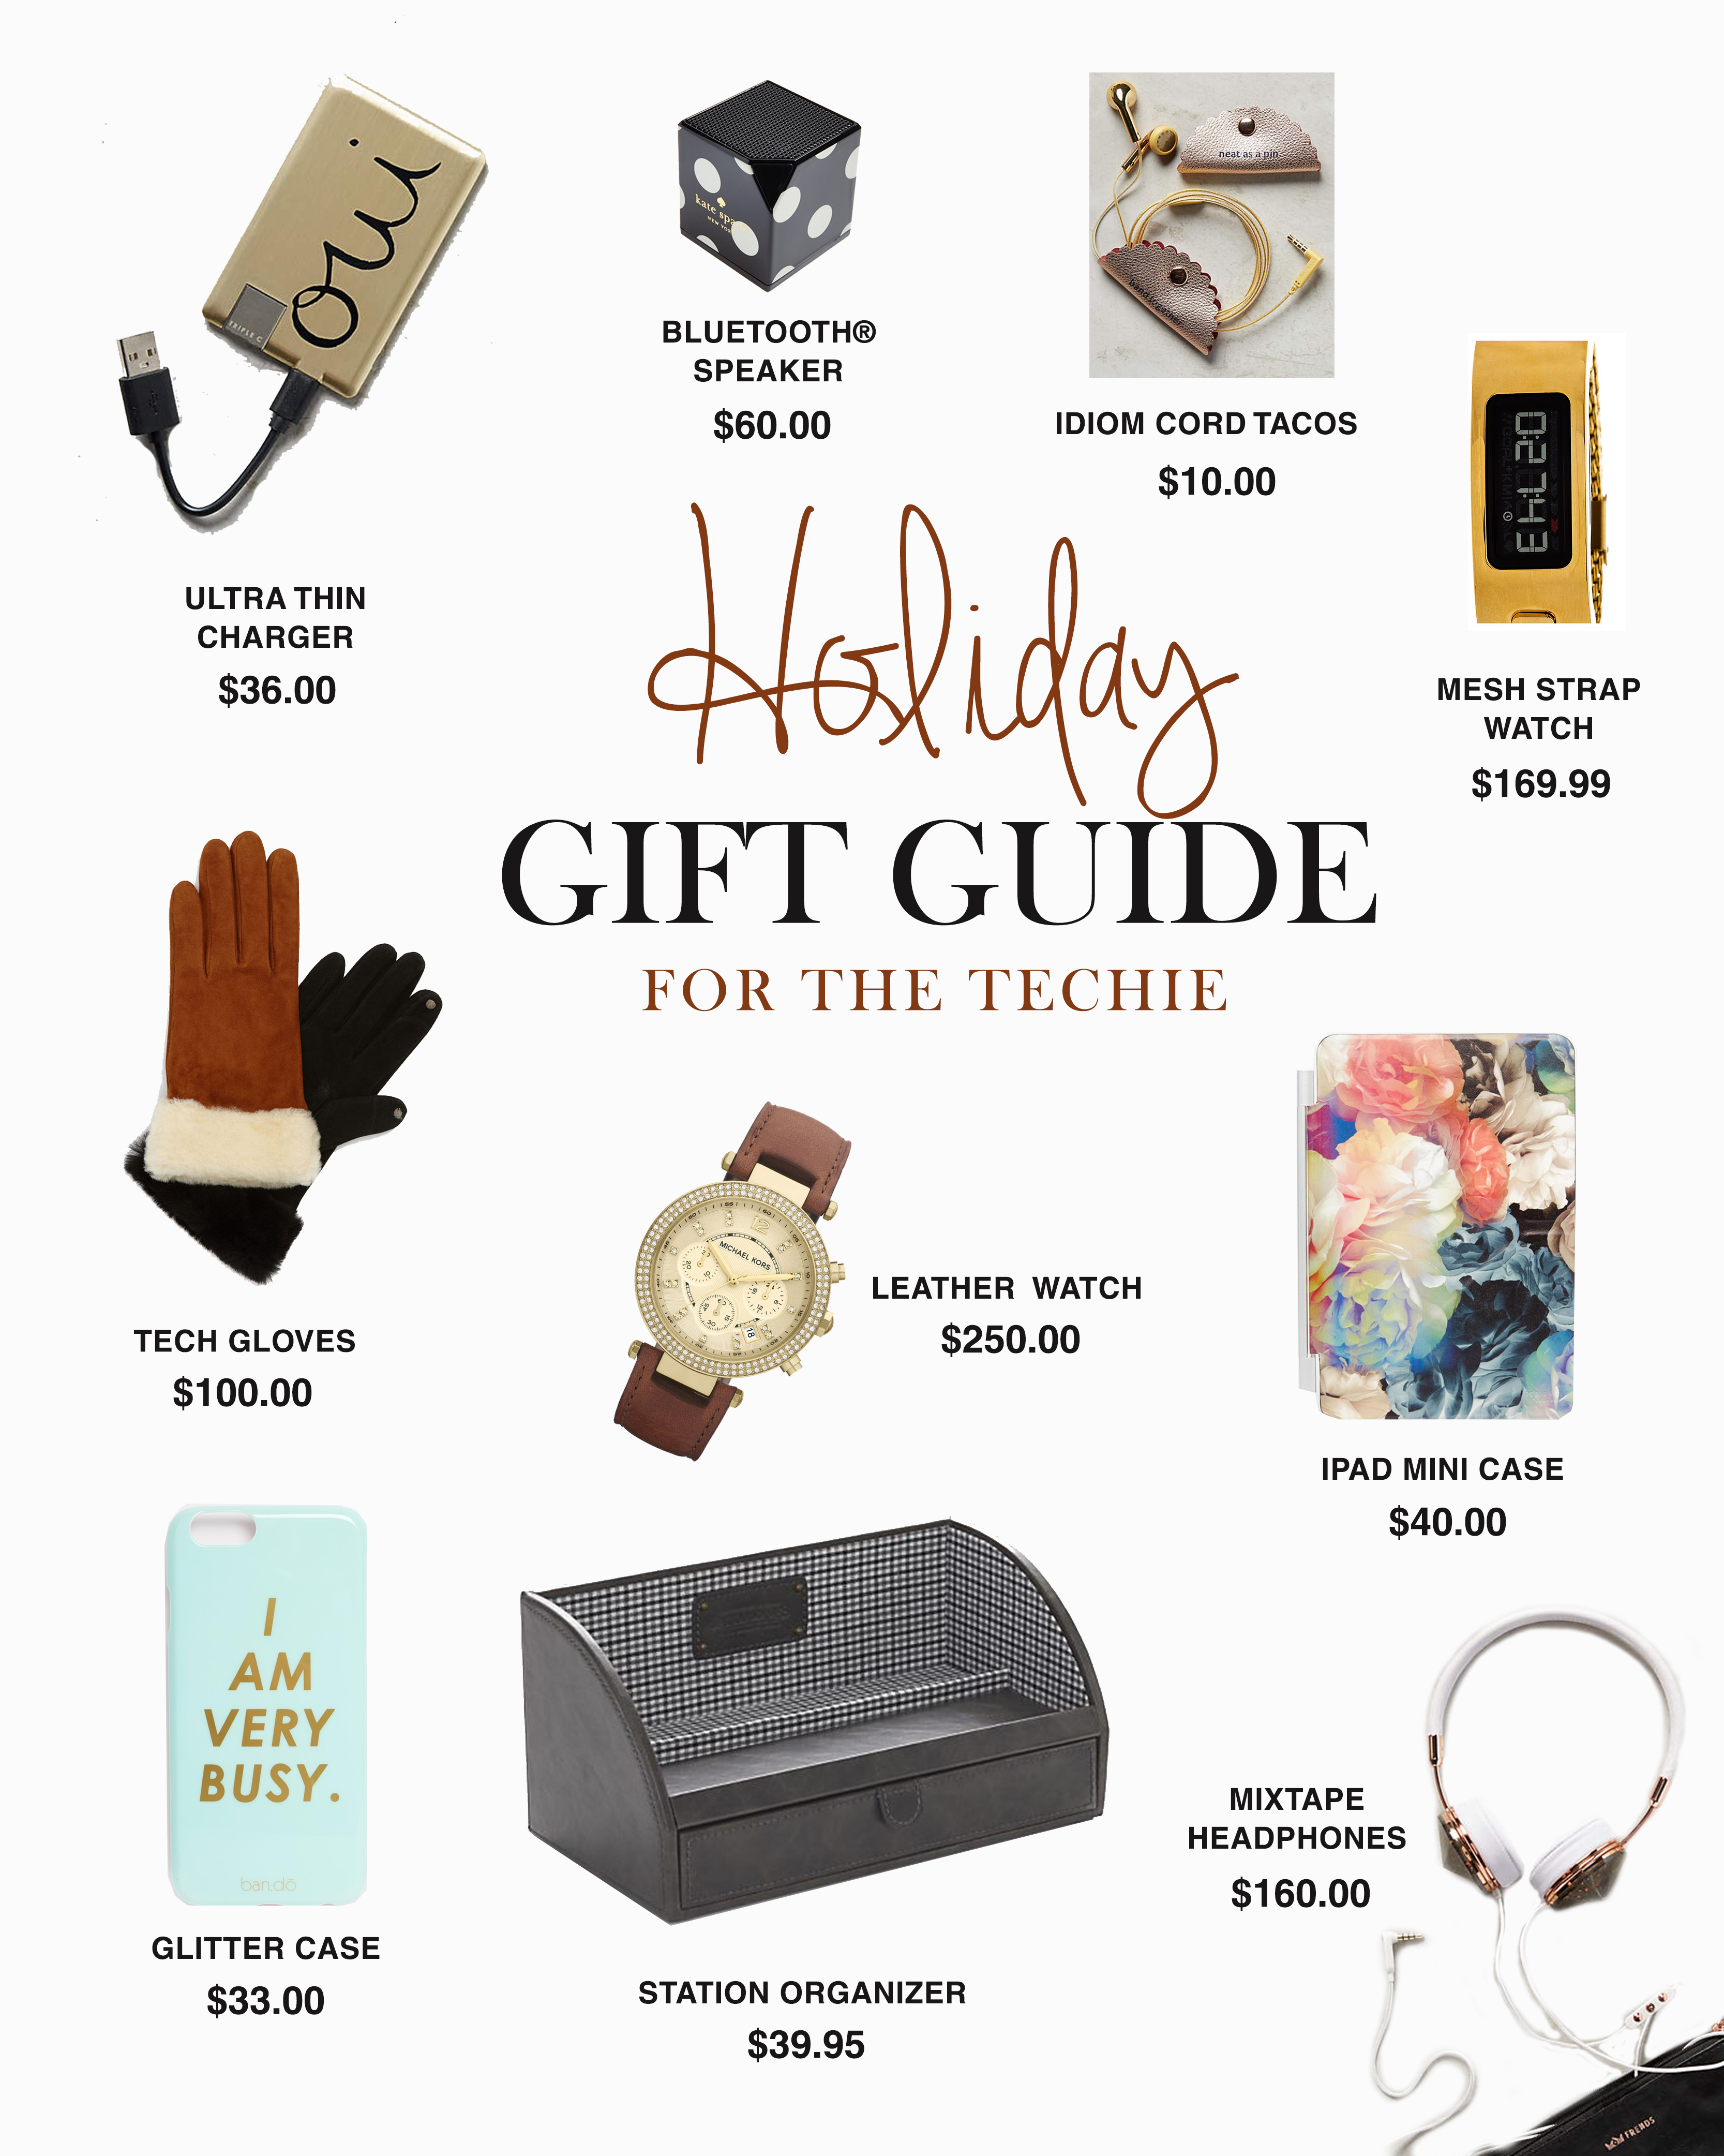 GIFT GUIDE - techie (1)